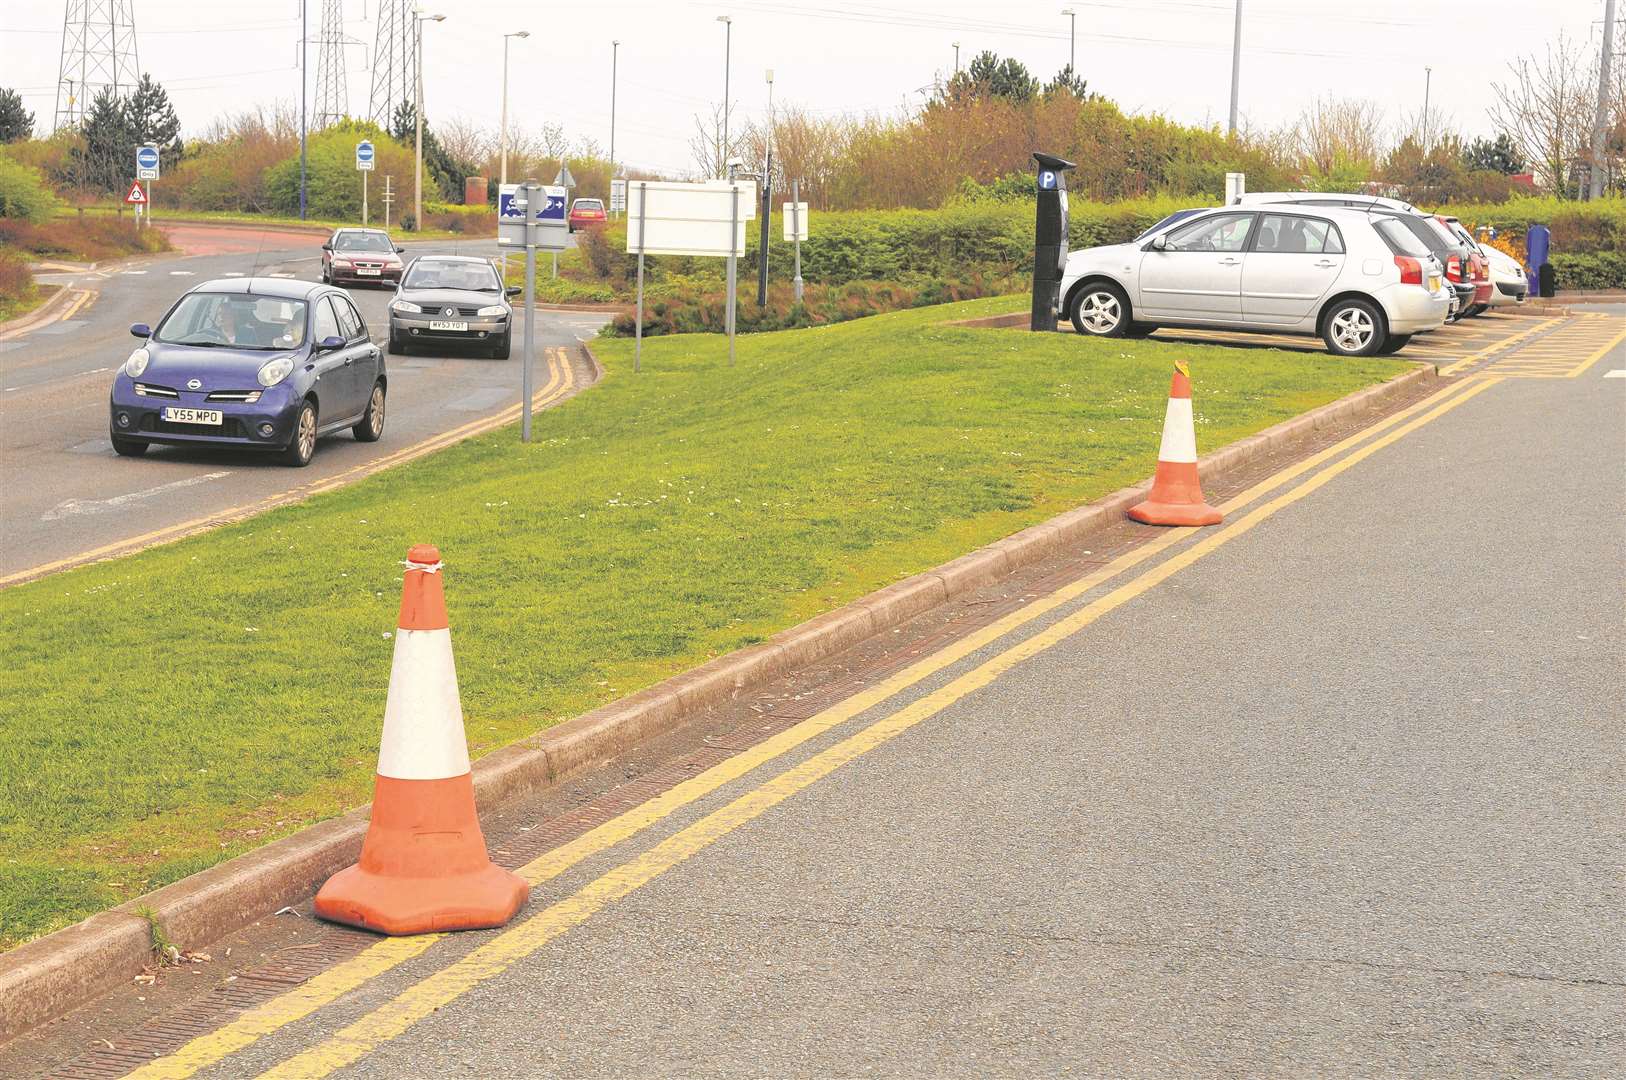 Cones are used to stop people parking on double yellow lines